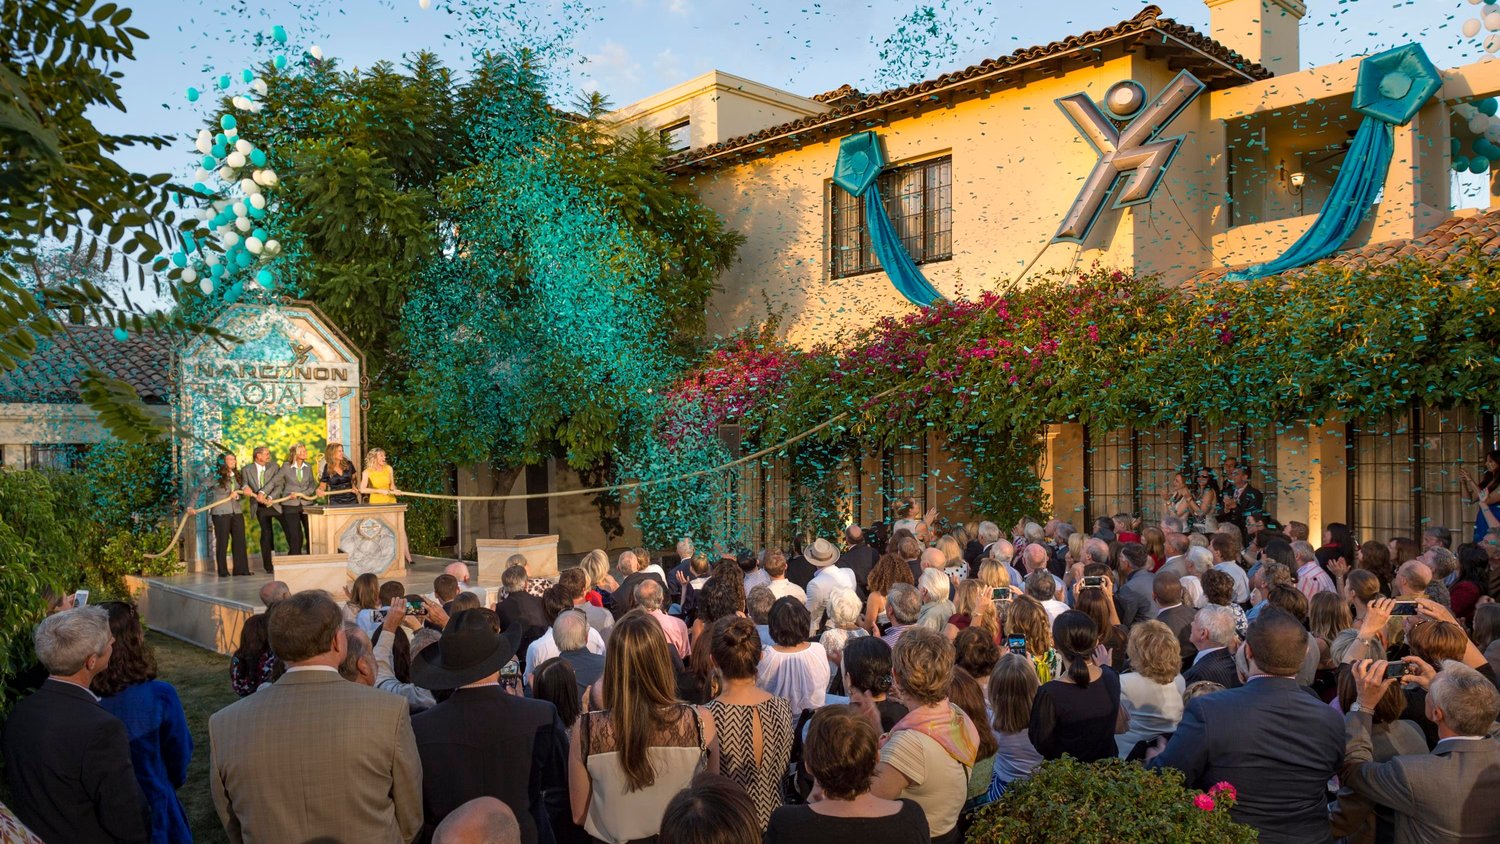 NARCONON SUPPORTERS AND THEIR GUESTS gathered at the exquisite new Narconon center in Ojai, California, Sunday, September 13, to celebrate the opening of the new center.